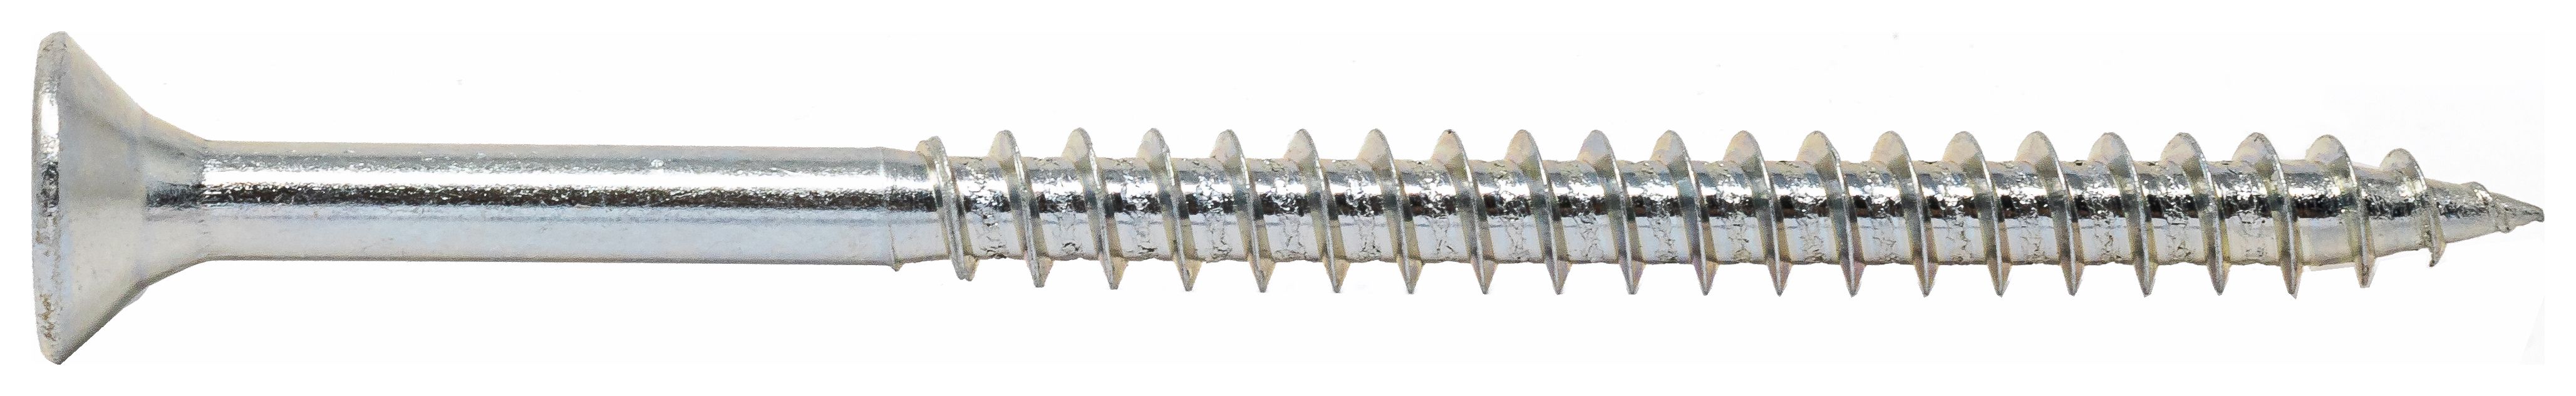 Image of Wickes Single Thread Zinc Plated Screw - 4 X 25mm Pack Of 200